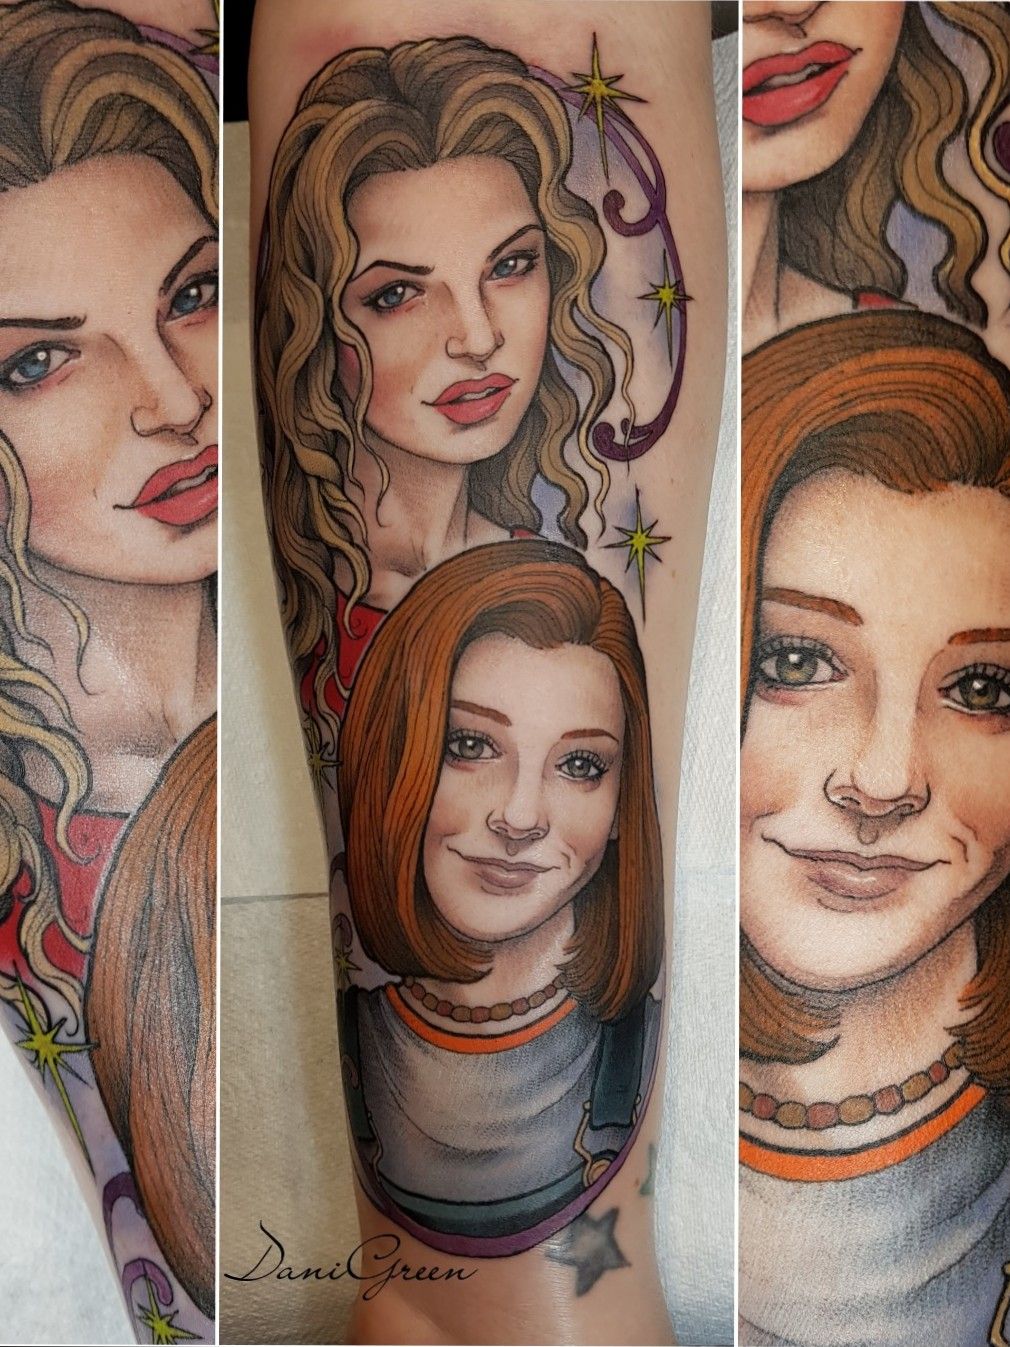 buffythevampireslayer in Tattoos  Search in 13M Tattoos Now  Tattoodo